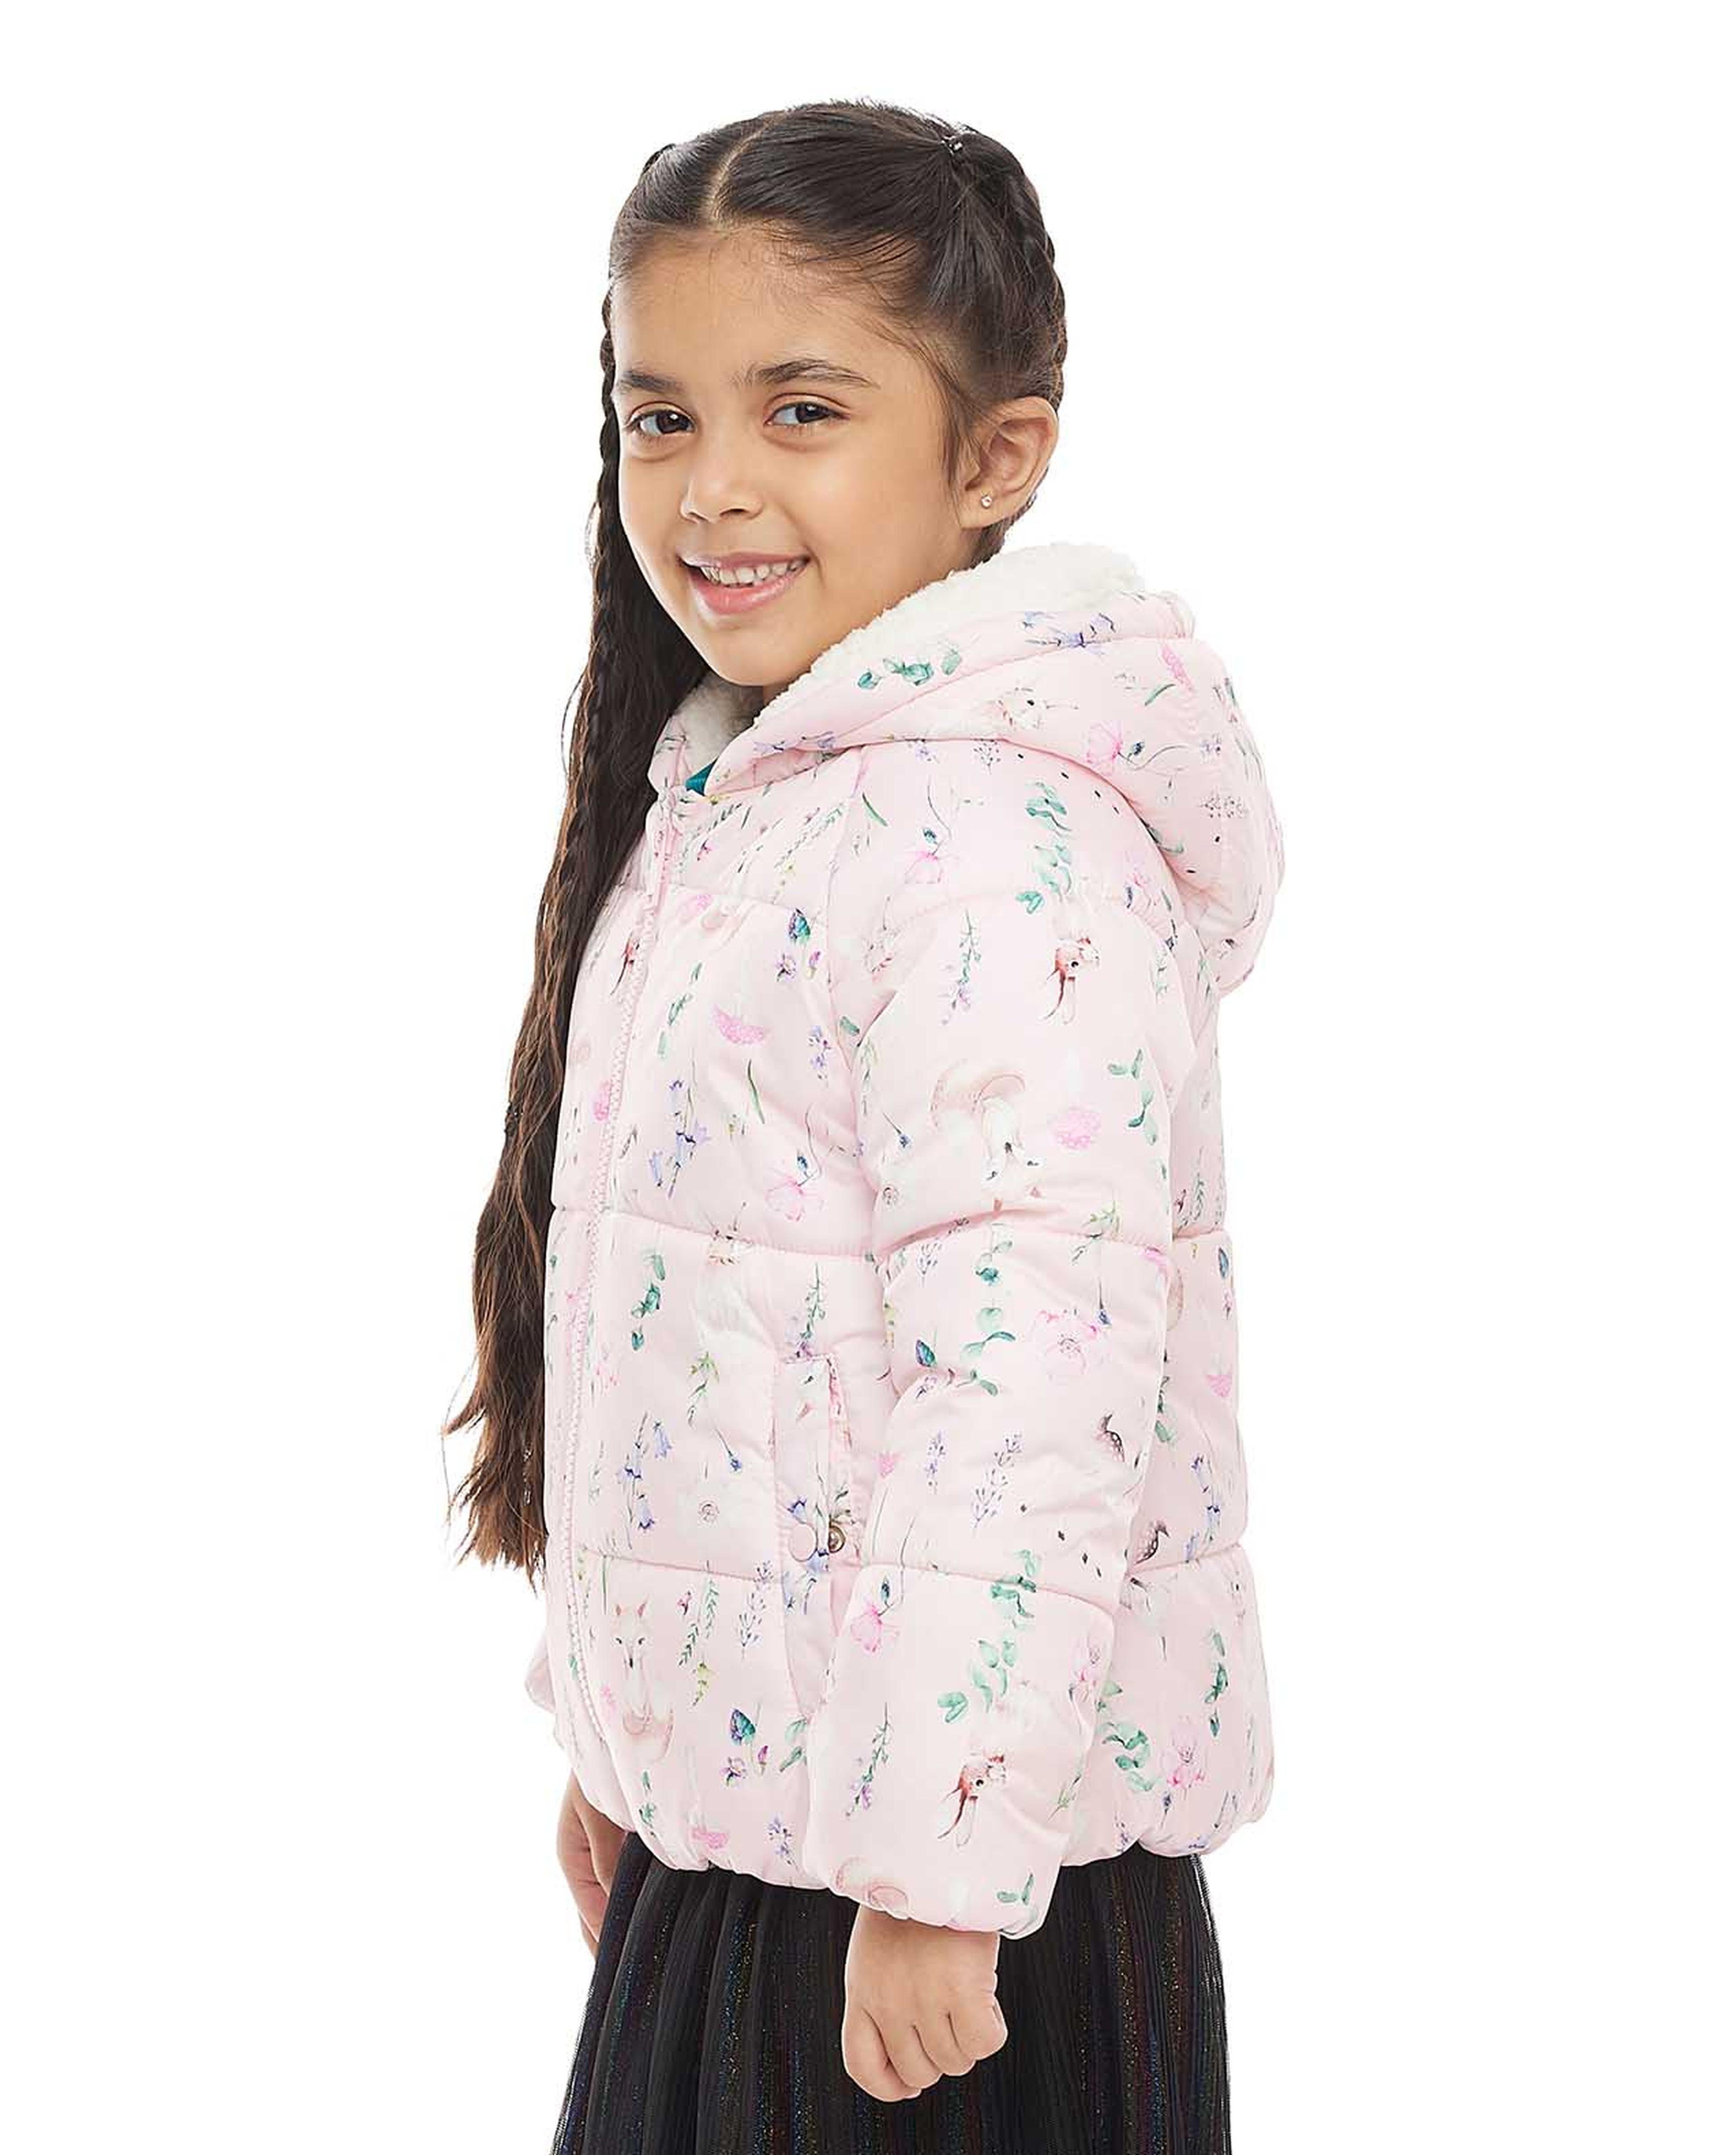 Printed Hooded Puffer Jacket with Zipper Front